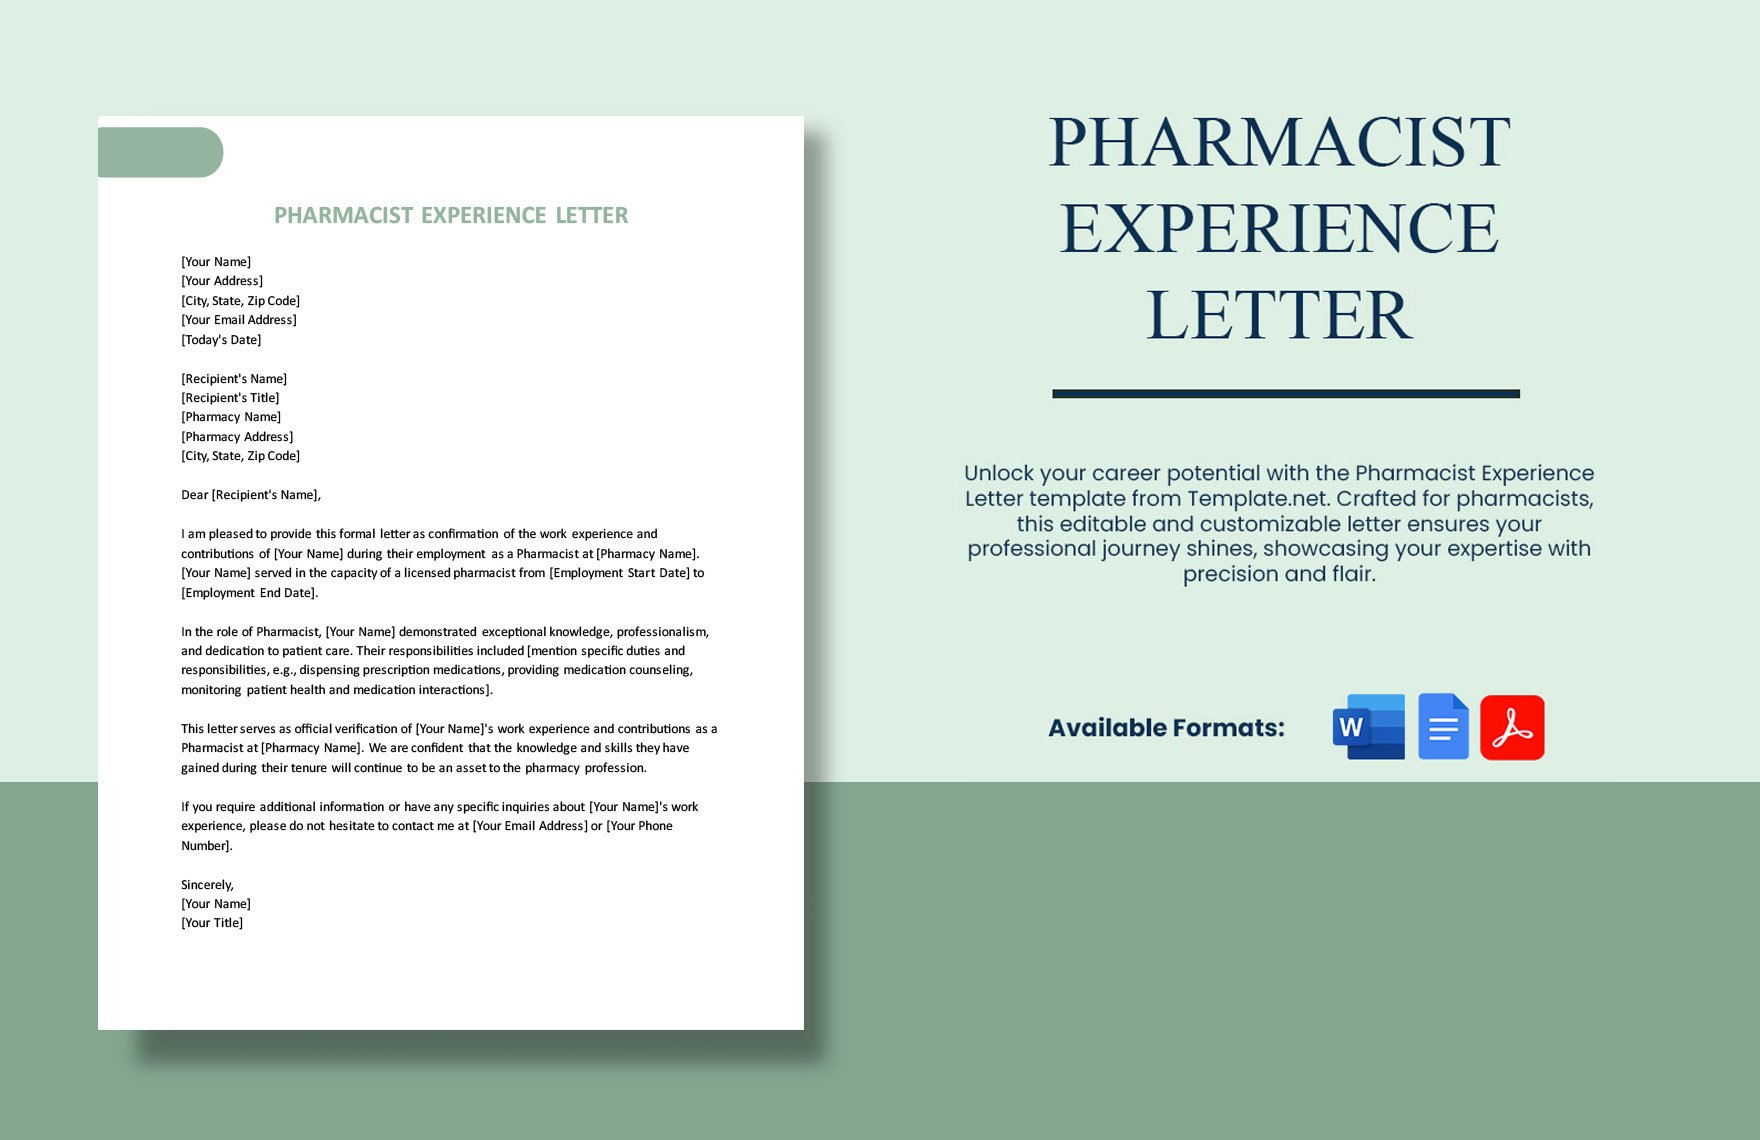 Free Pharmacist Experience Letter in Word, Google Docs, PDF